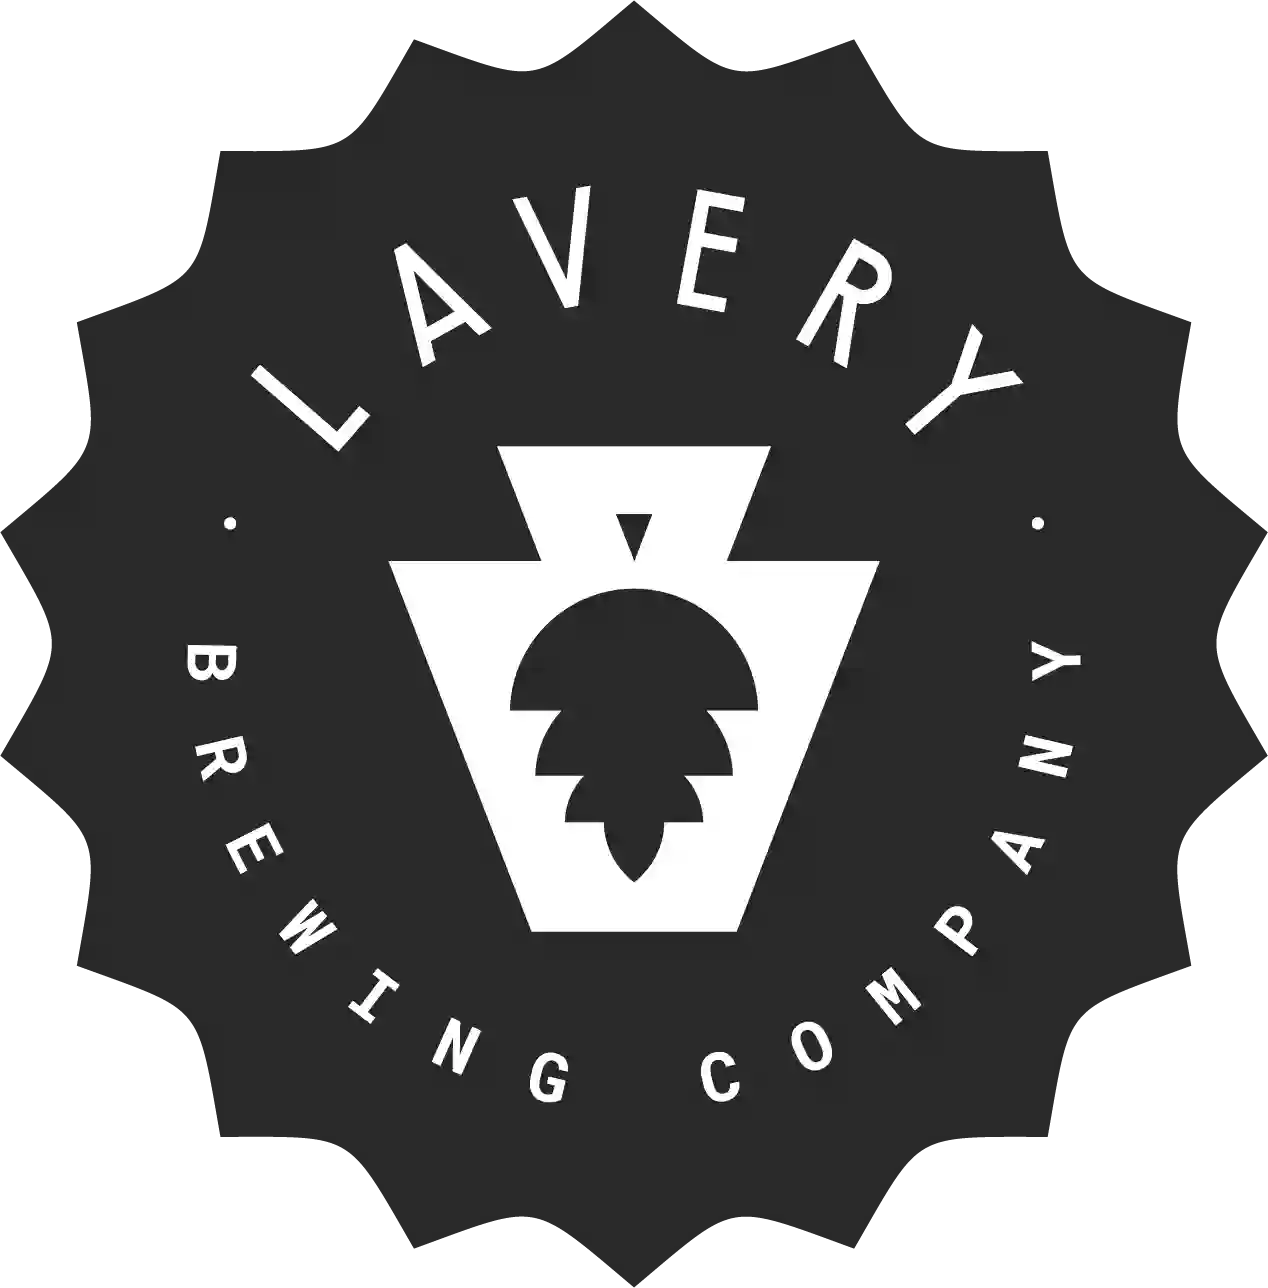 Lavery Brewing Co